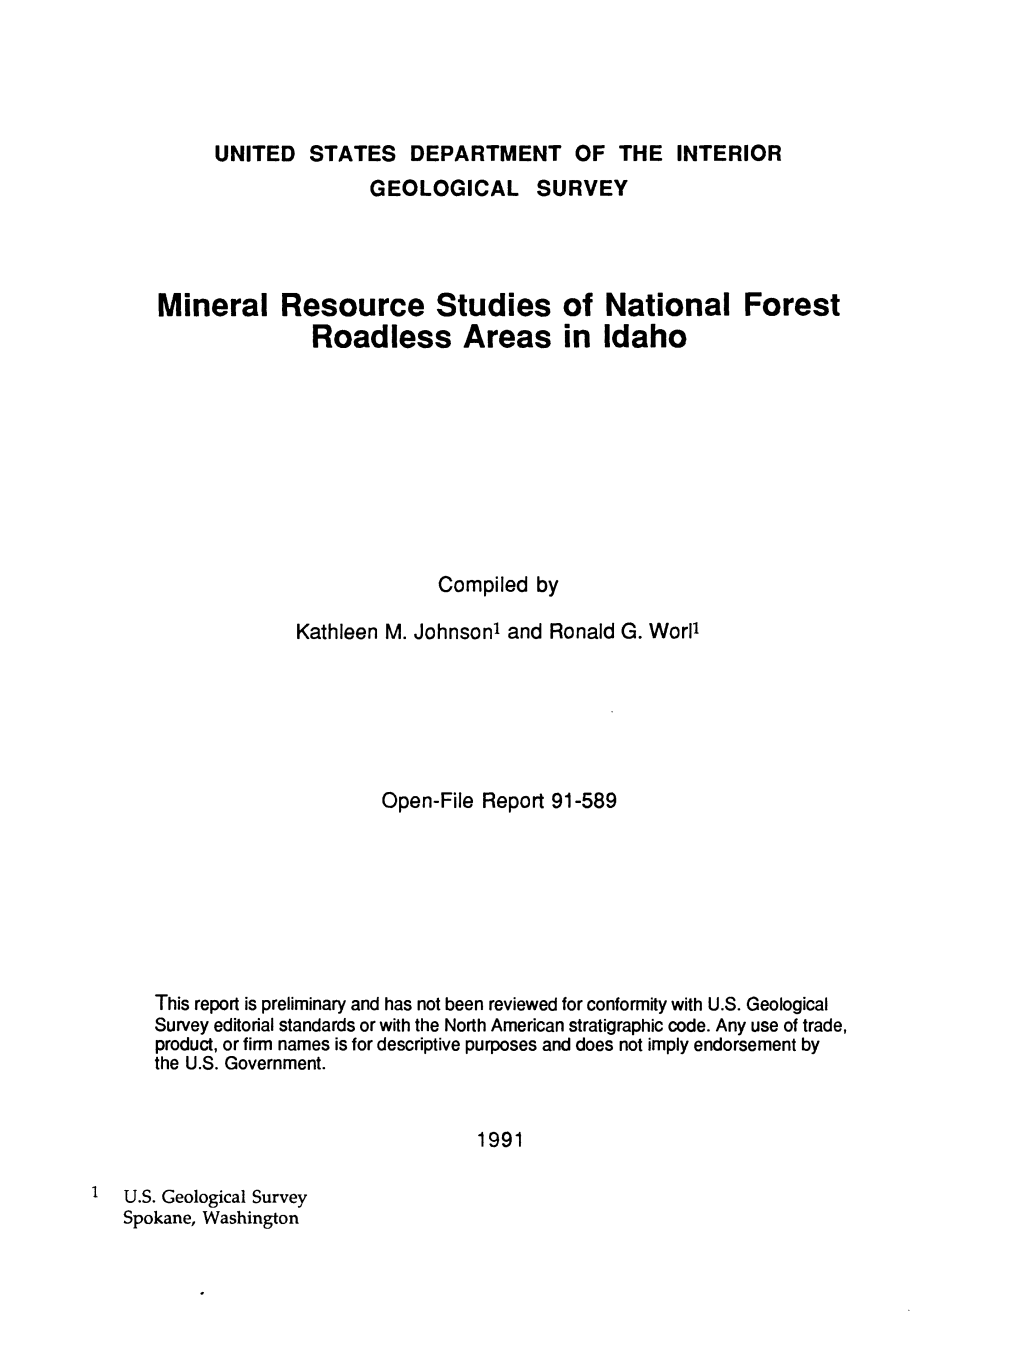 Mineral Resource Studies of National Forest Roadless Areas in Idaho